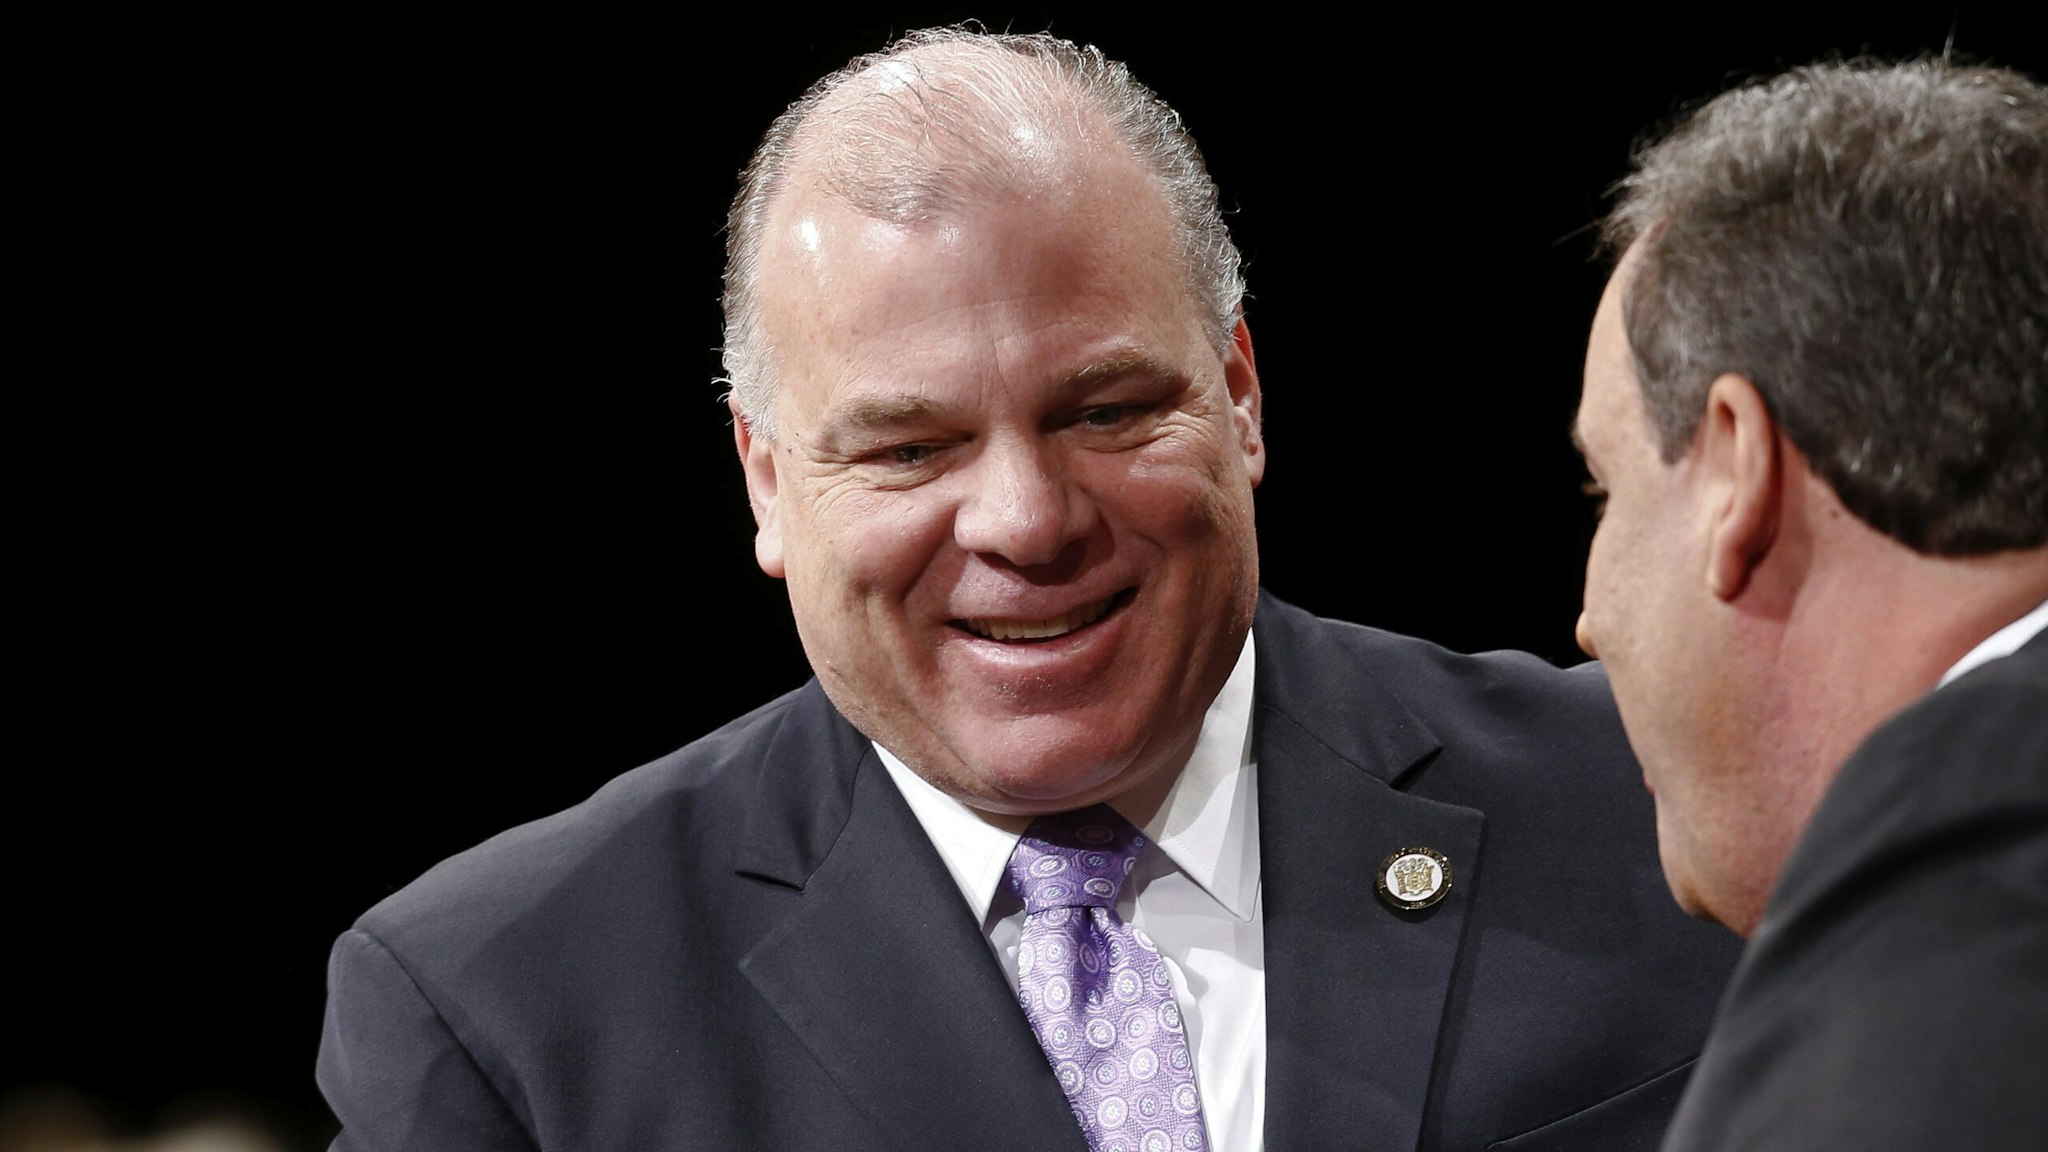 TRENTON, NJ - JANUARY 21: New Jersey Senate President Steve Sweeney greets New Jersey Gov. Chris Christie prior to being sworn in for his second term on January 21, 2014 at the War Memorial in Trenton, New Jersey. Christie begins his second term amid controversy surrounding George Washington Bridge traffic and Hurricane Sandy relief distribution.